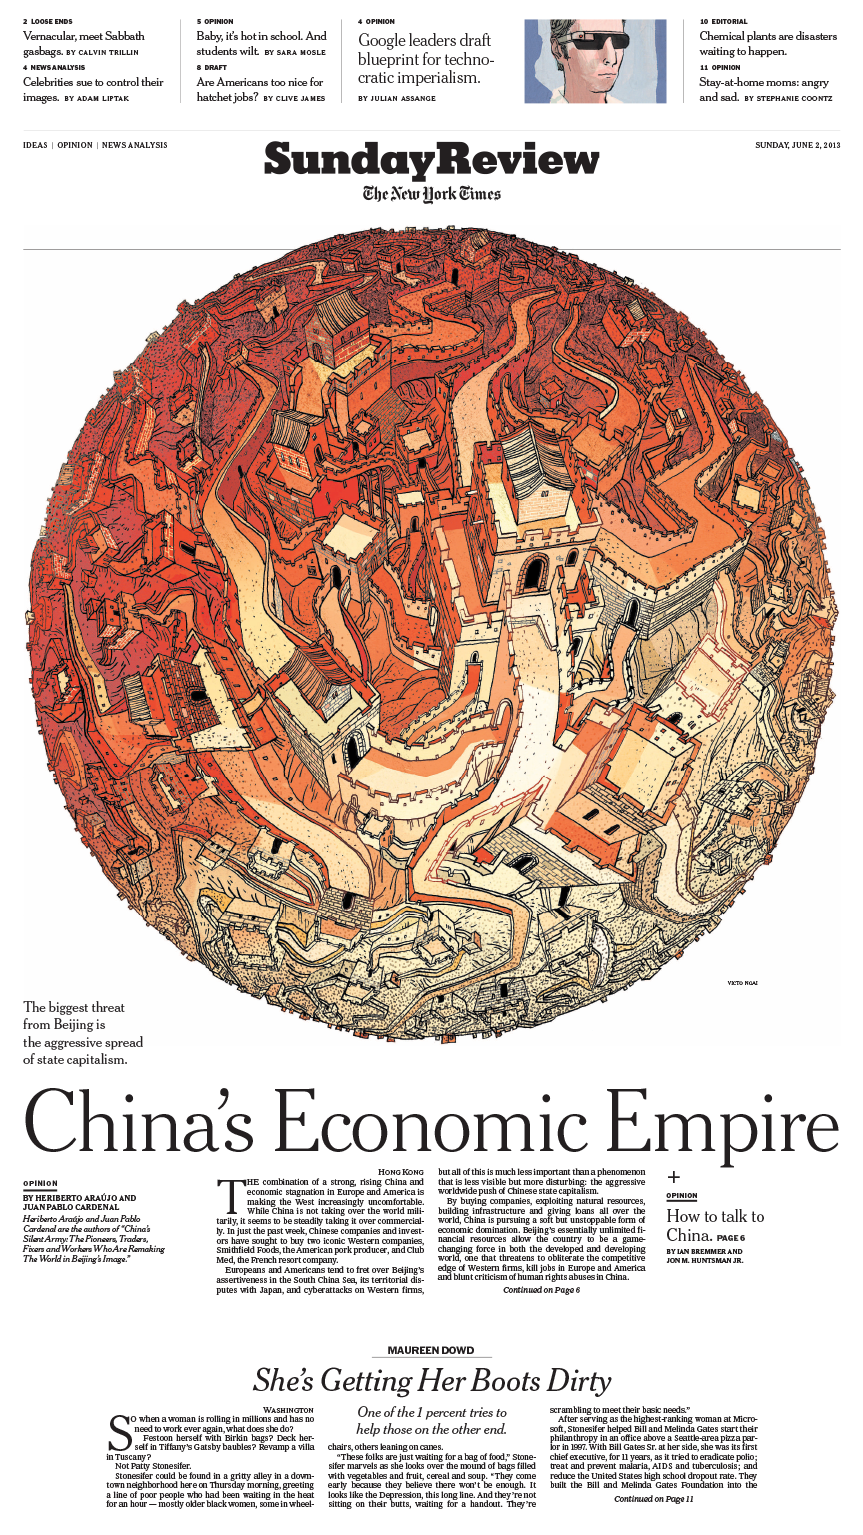 Sunday Review Cover: China's Economic Empire